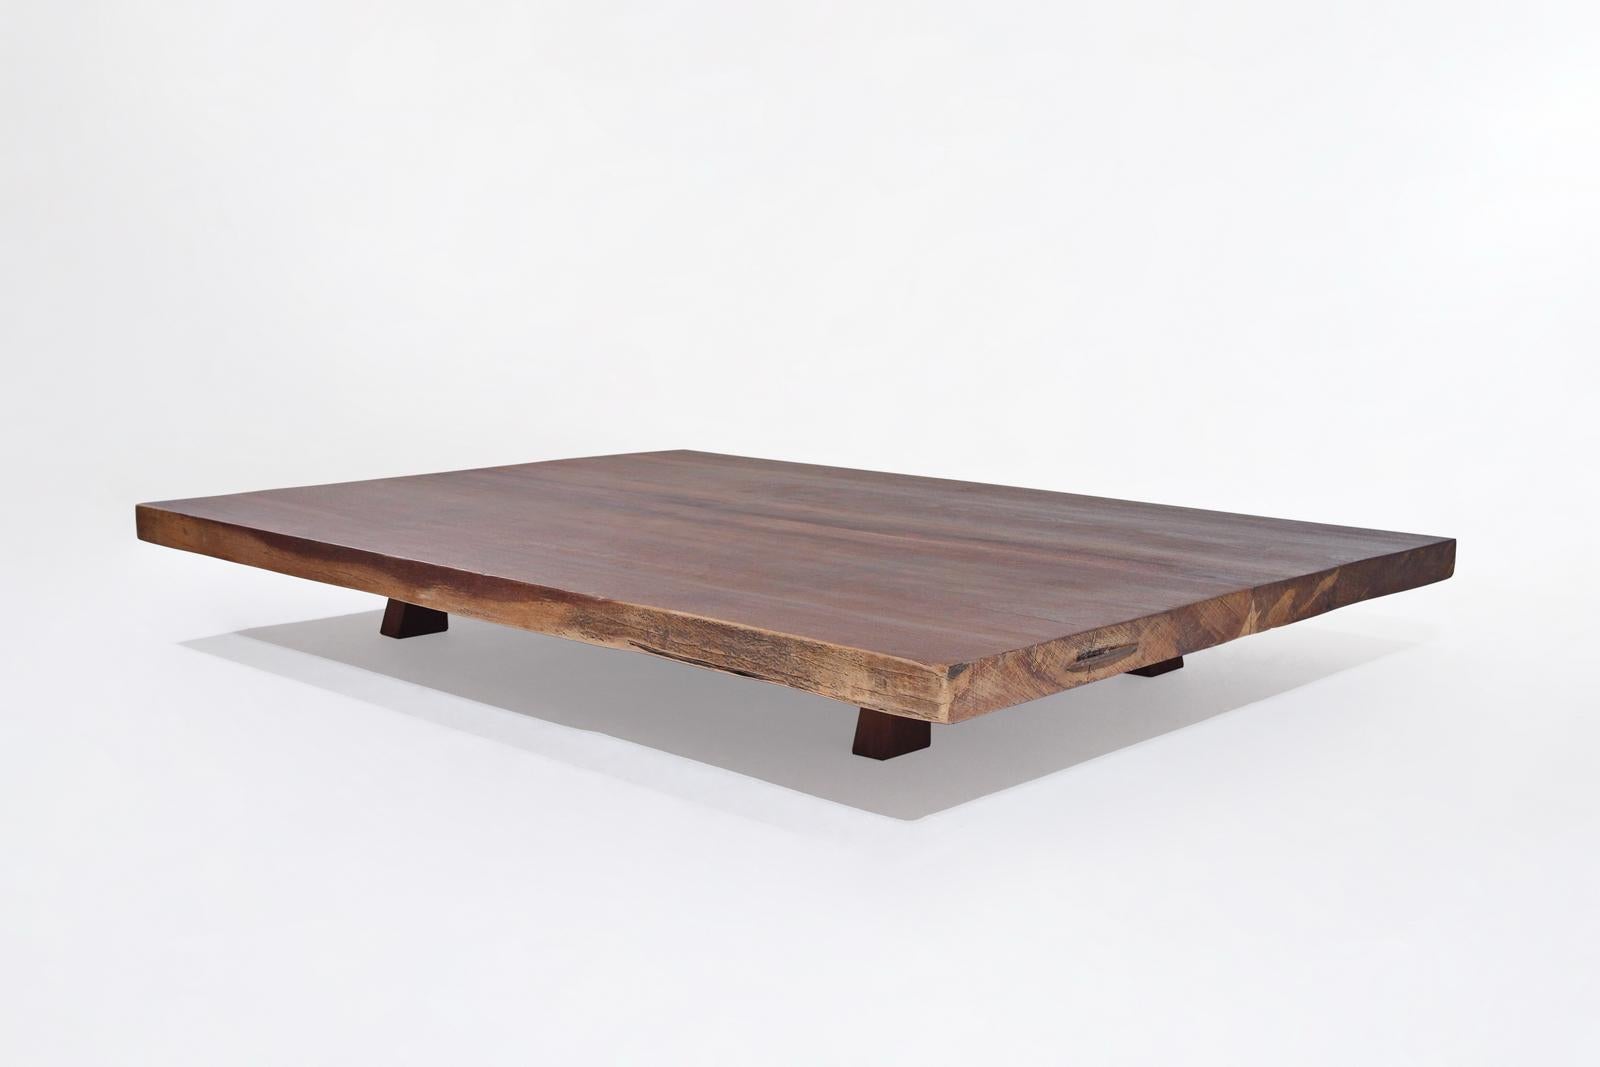 Minimalist Bespoke Coffee Table, Antique Hardwood Slab and Wood Bases, by P. Tendercool For Sale